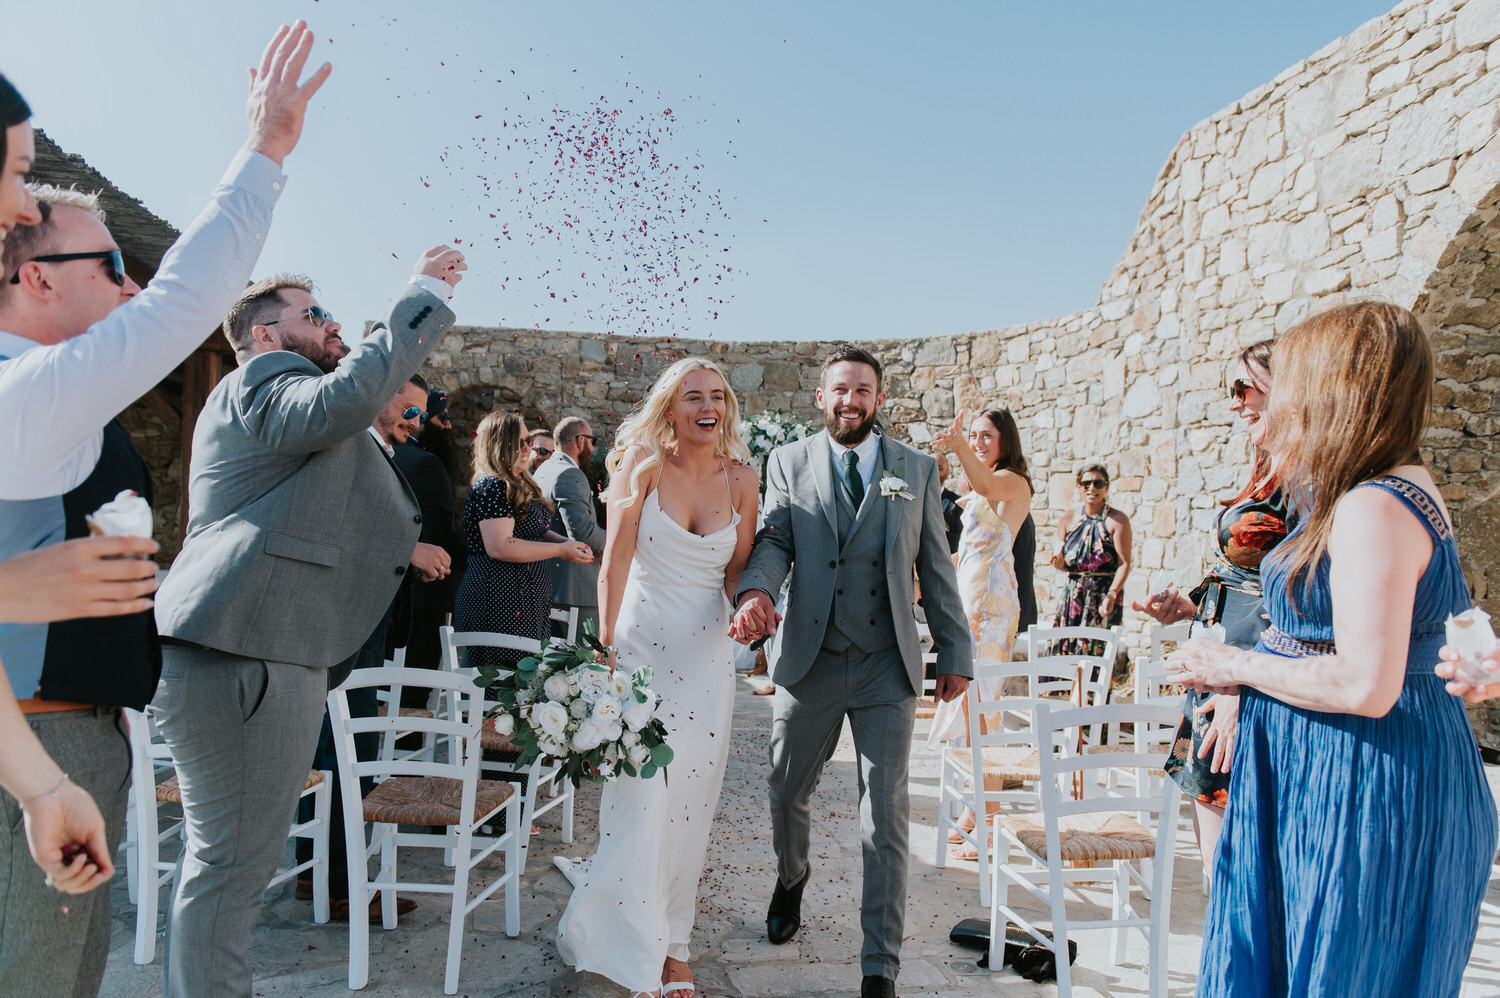 Mykonos wedding photographer: friends laughing and showering bride and groom on their exit from the aisle holding hands and laughing.